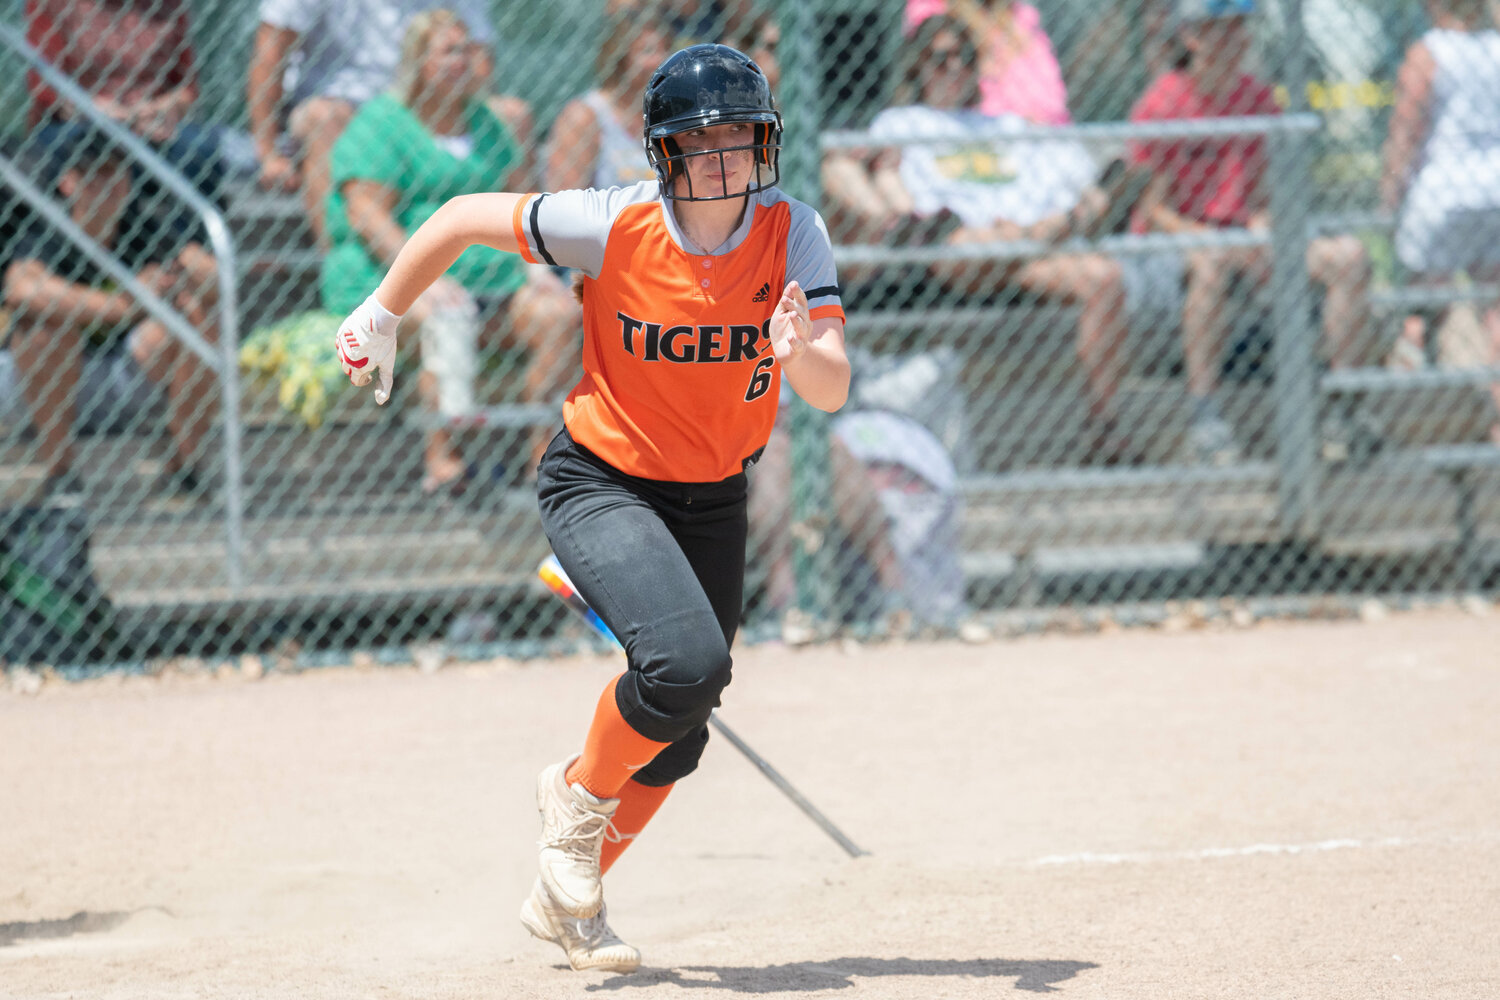 Hollynn Wakefield gets out of the batter's box during Centralia's 5-4 loss to Lynden in the first round of the 2A state tournament, May 26 in Selah.